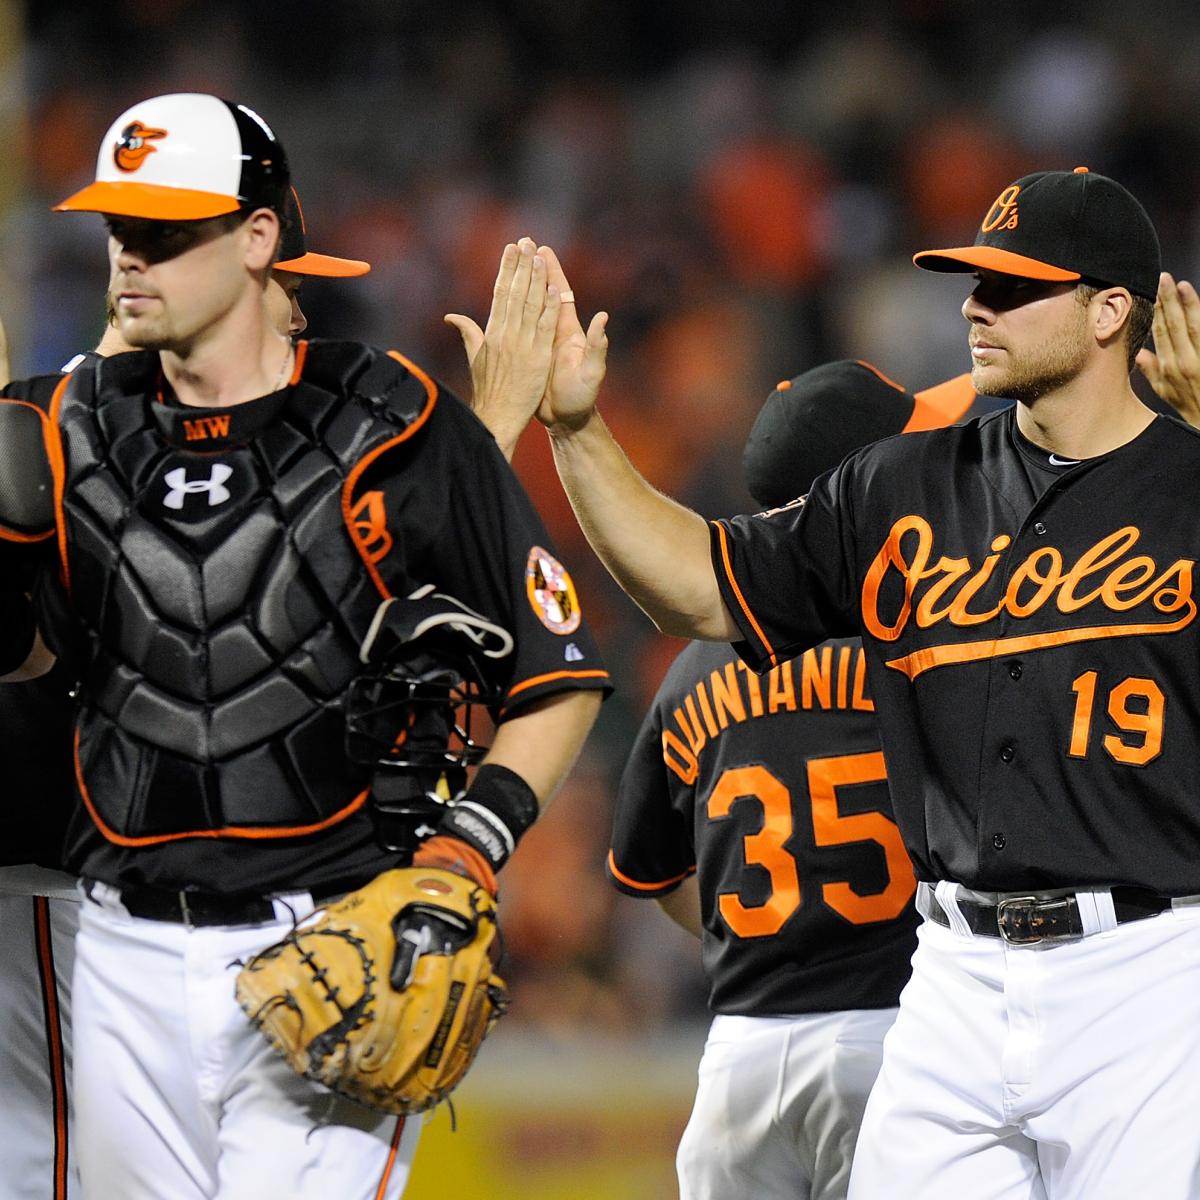 Baltimore Orioles Players Who Will Be Even Better in 2013 Than 2012